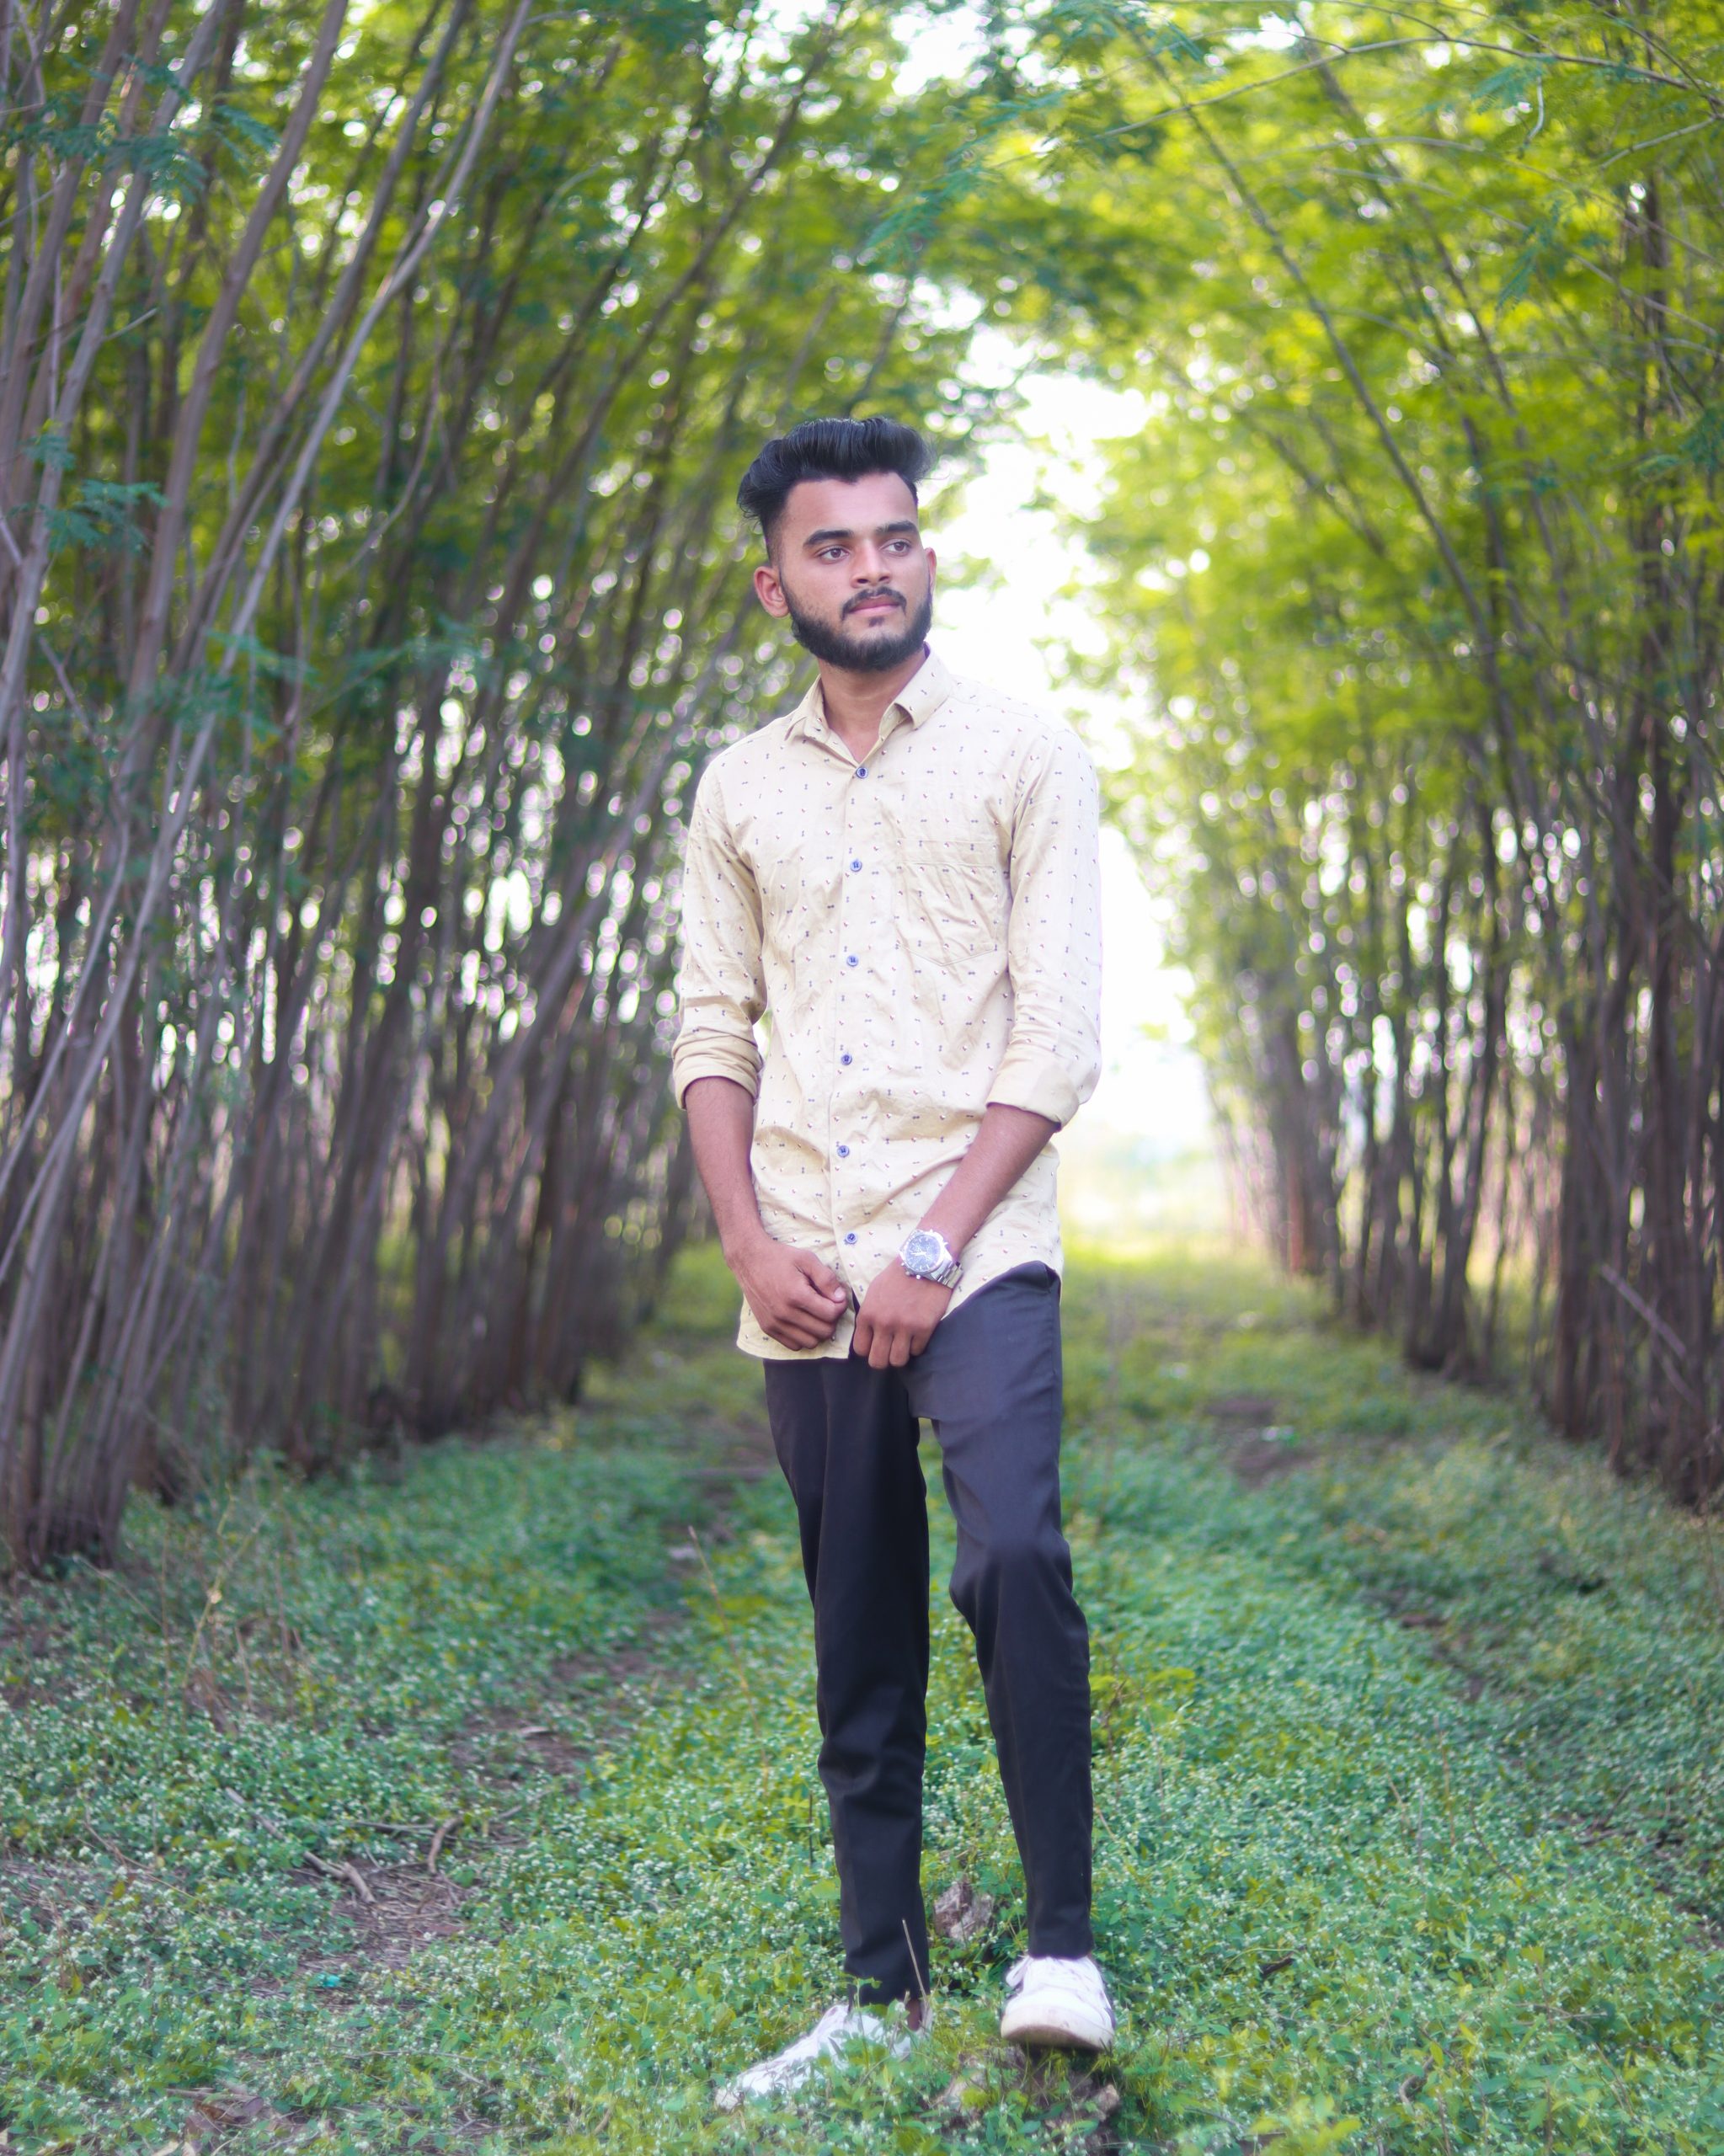 Premium Photo | Wildly Chic Indian Male Model Rocks Madras Check Shirt and  Cargo Bottoms Amidst Jungle Backdrop